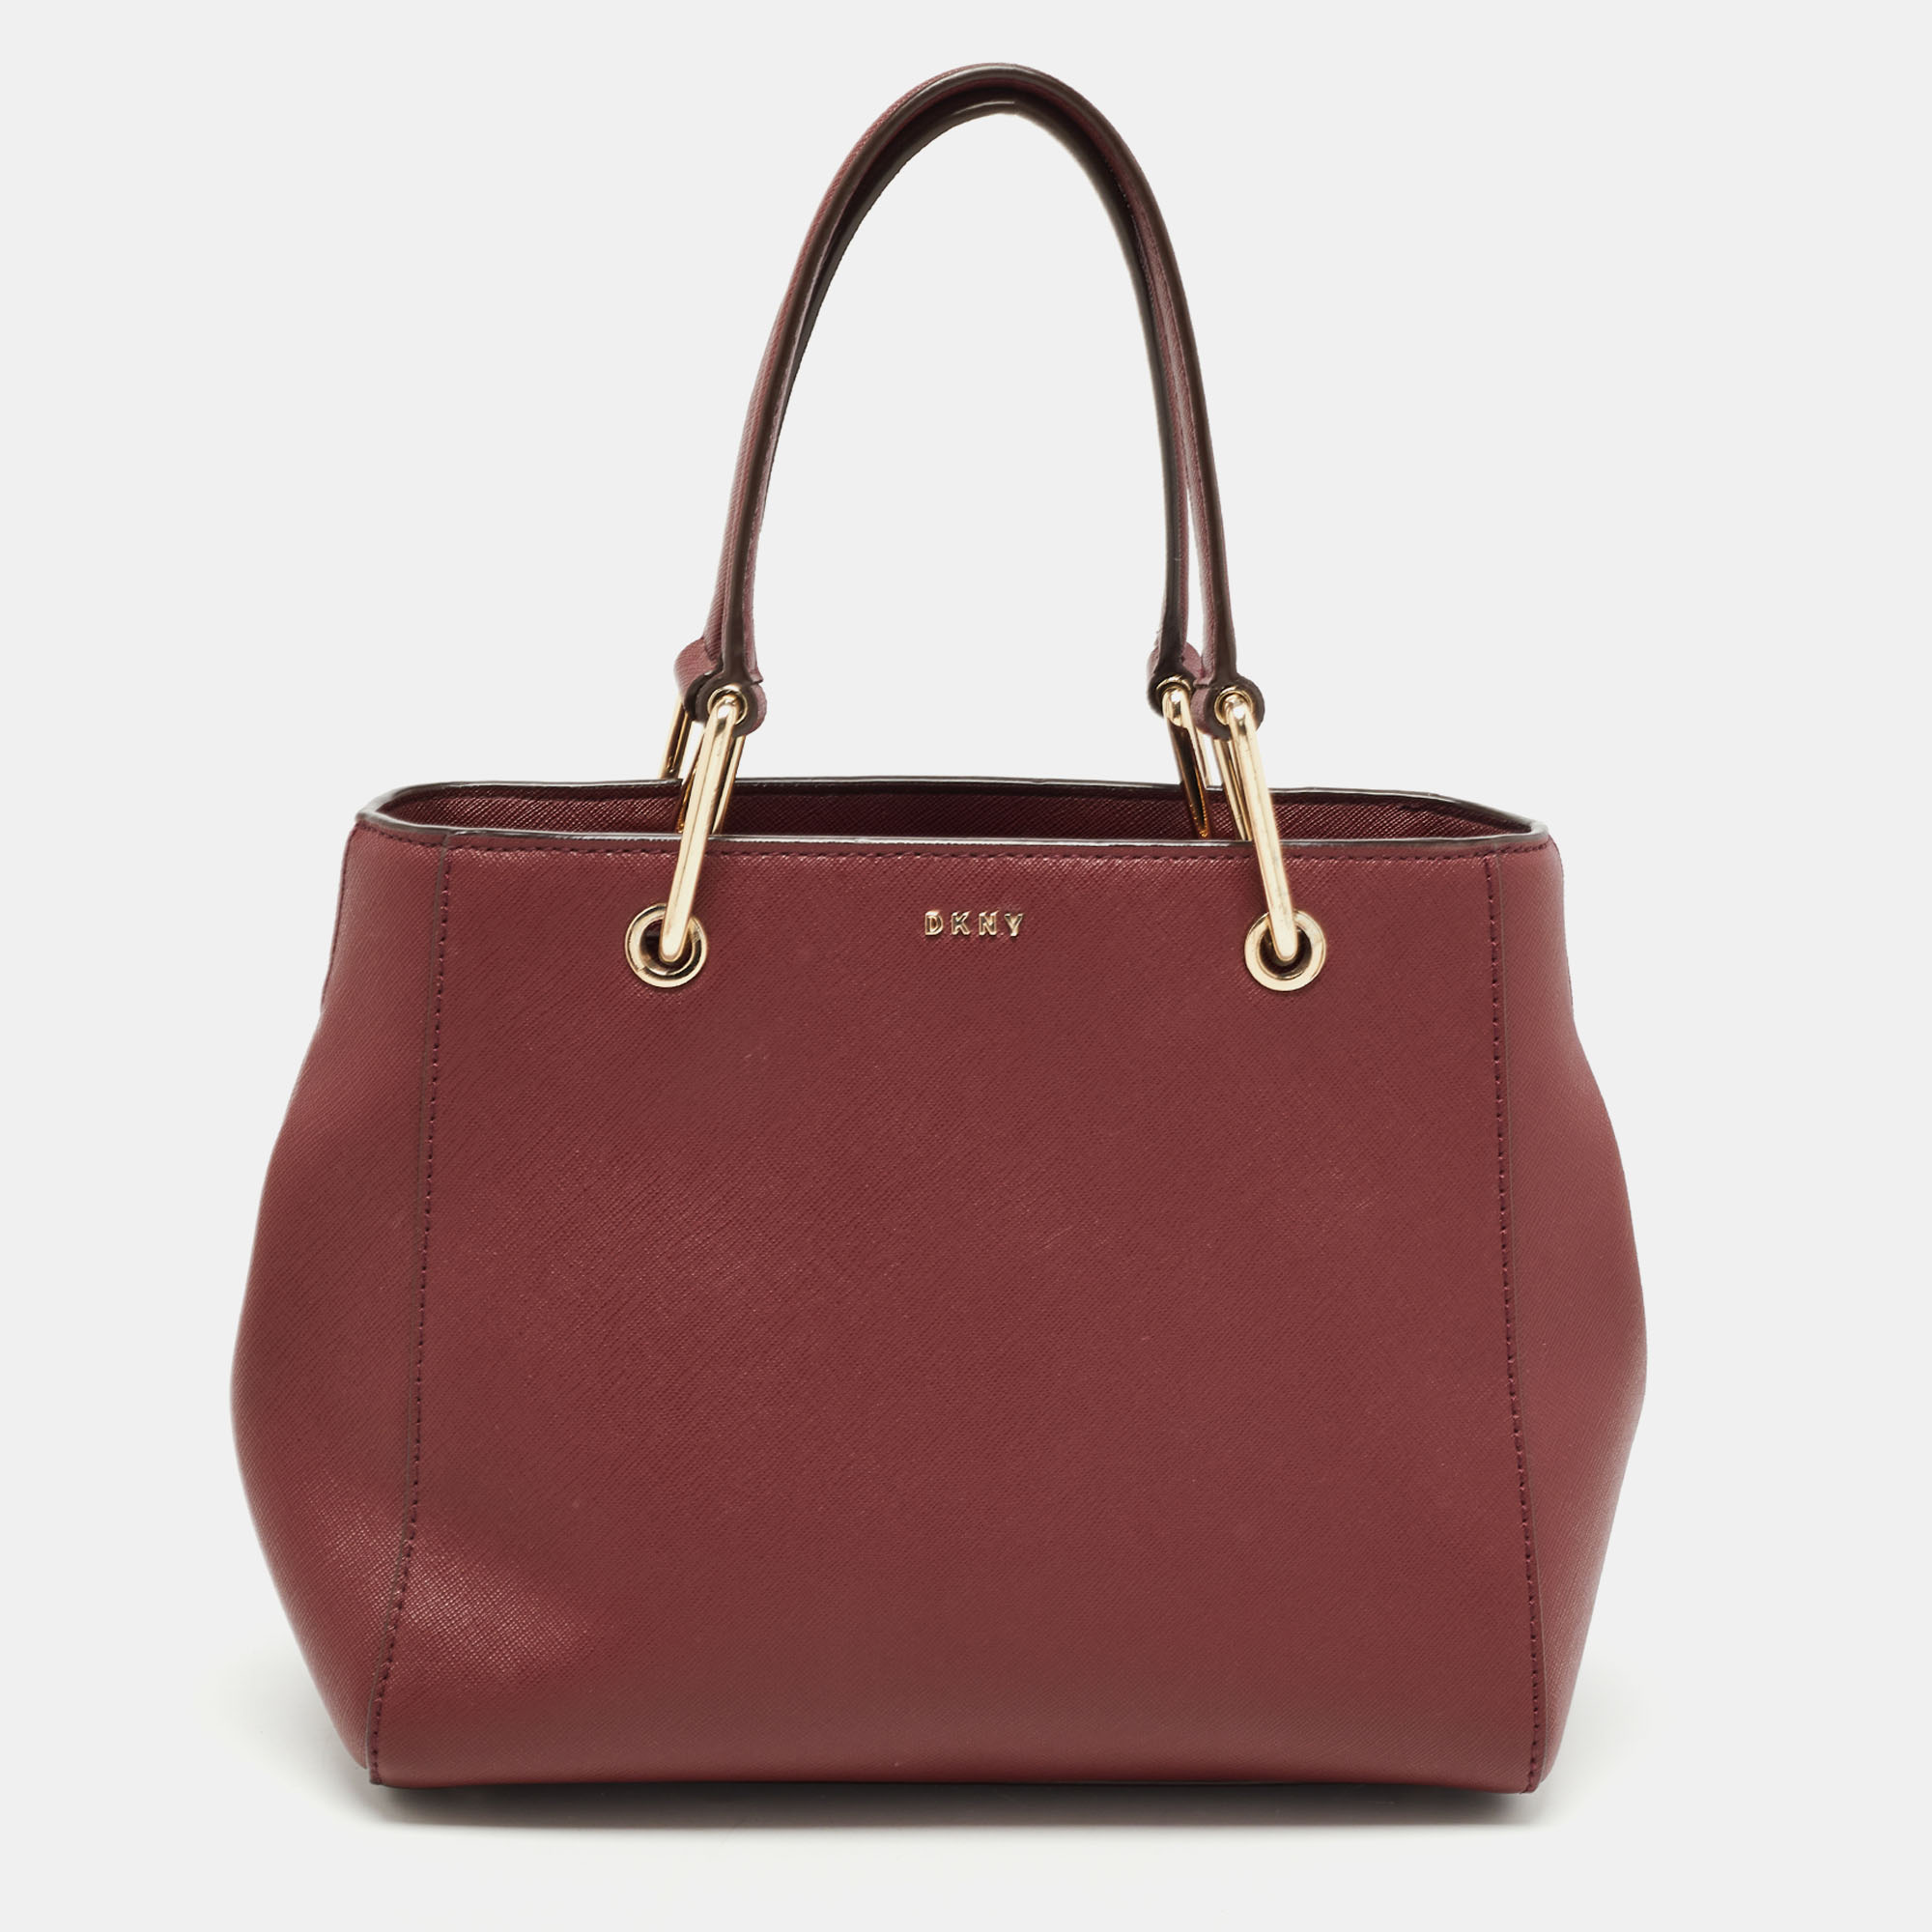 Pre-owned Dkny Burgundy Saffiano Leather Middle Zip Tote